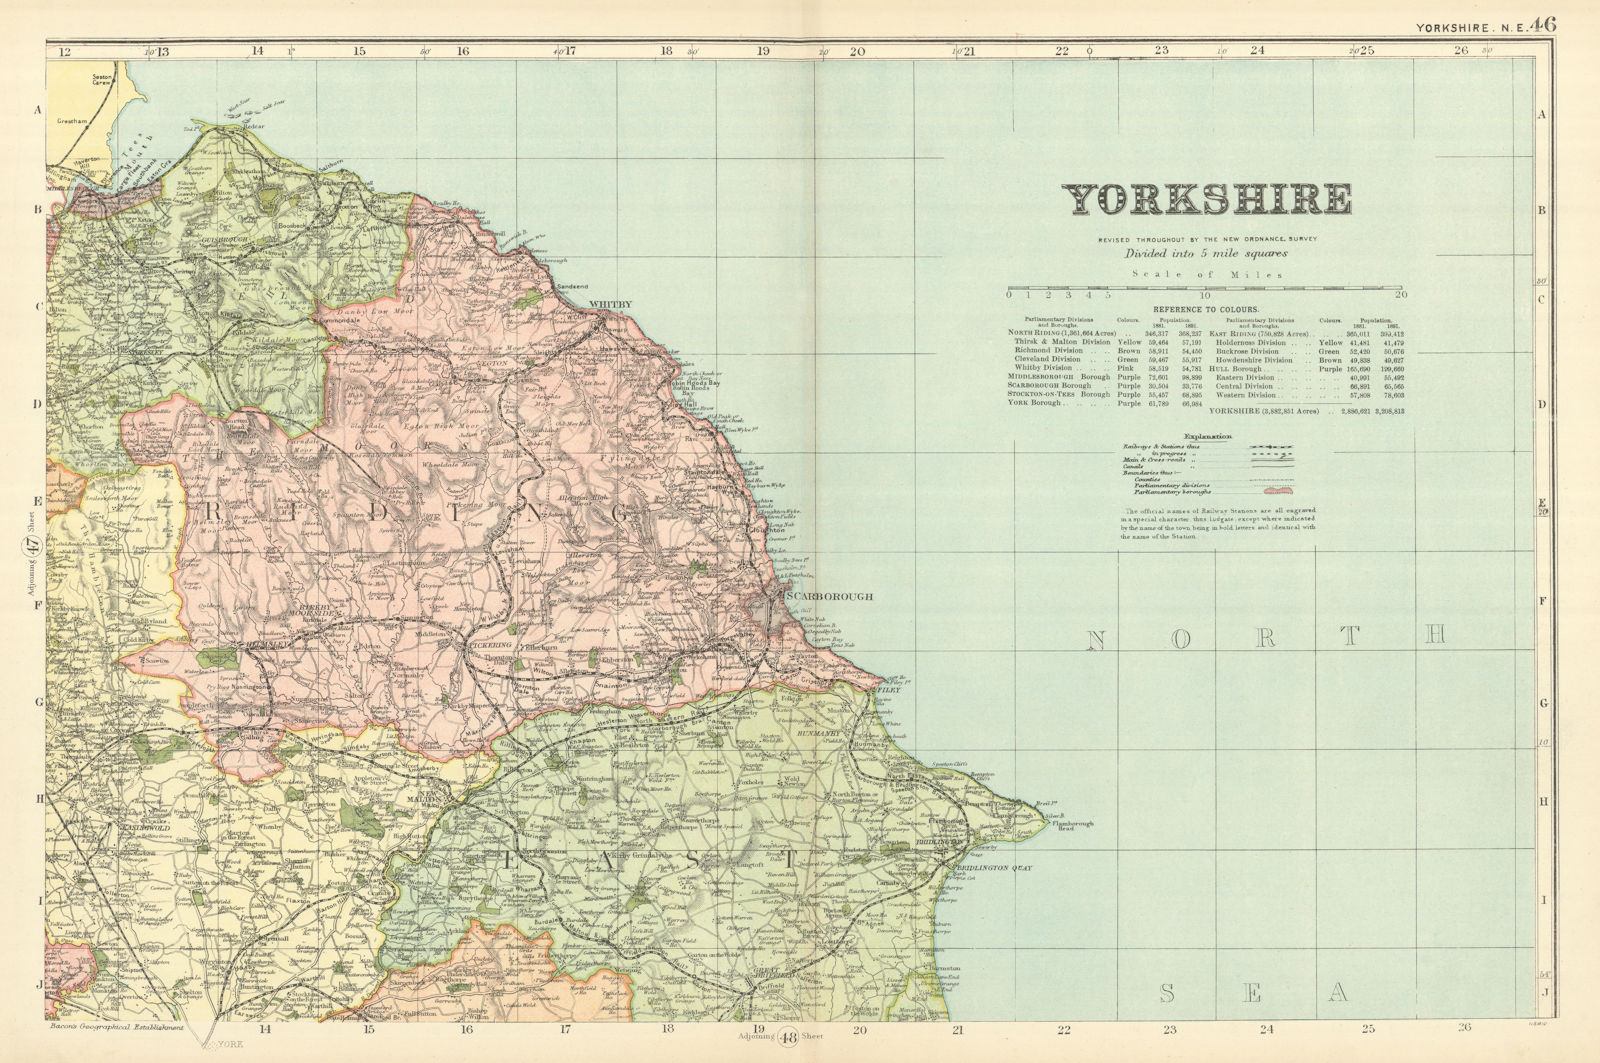 YORKSHIRE (North East) Scarborough Whitby antique county map by GW BACON 1898